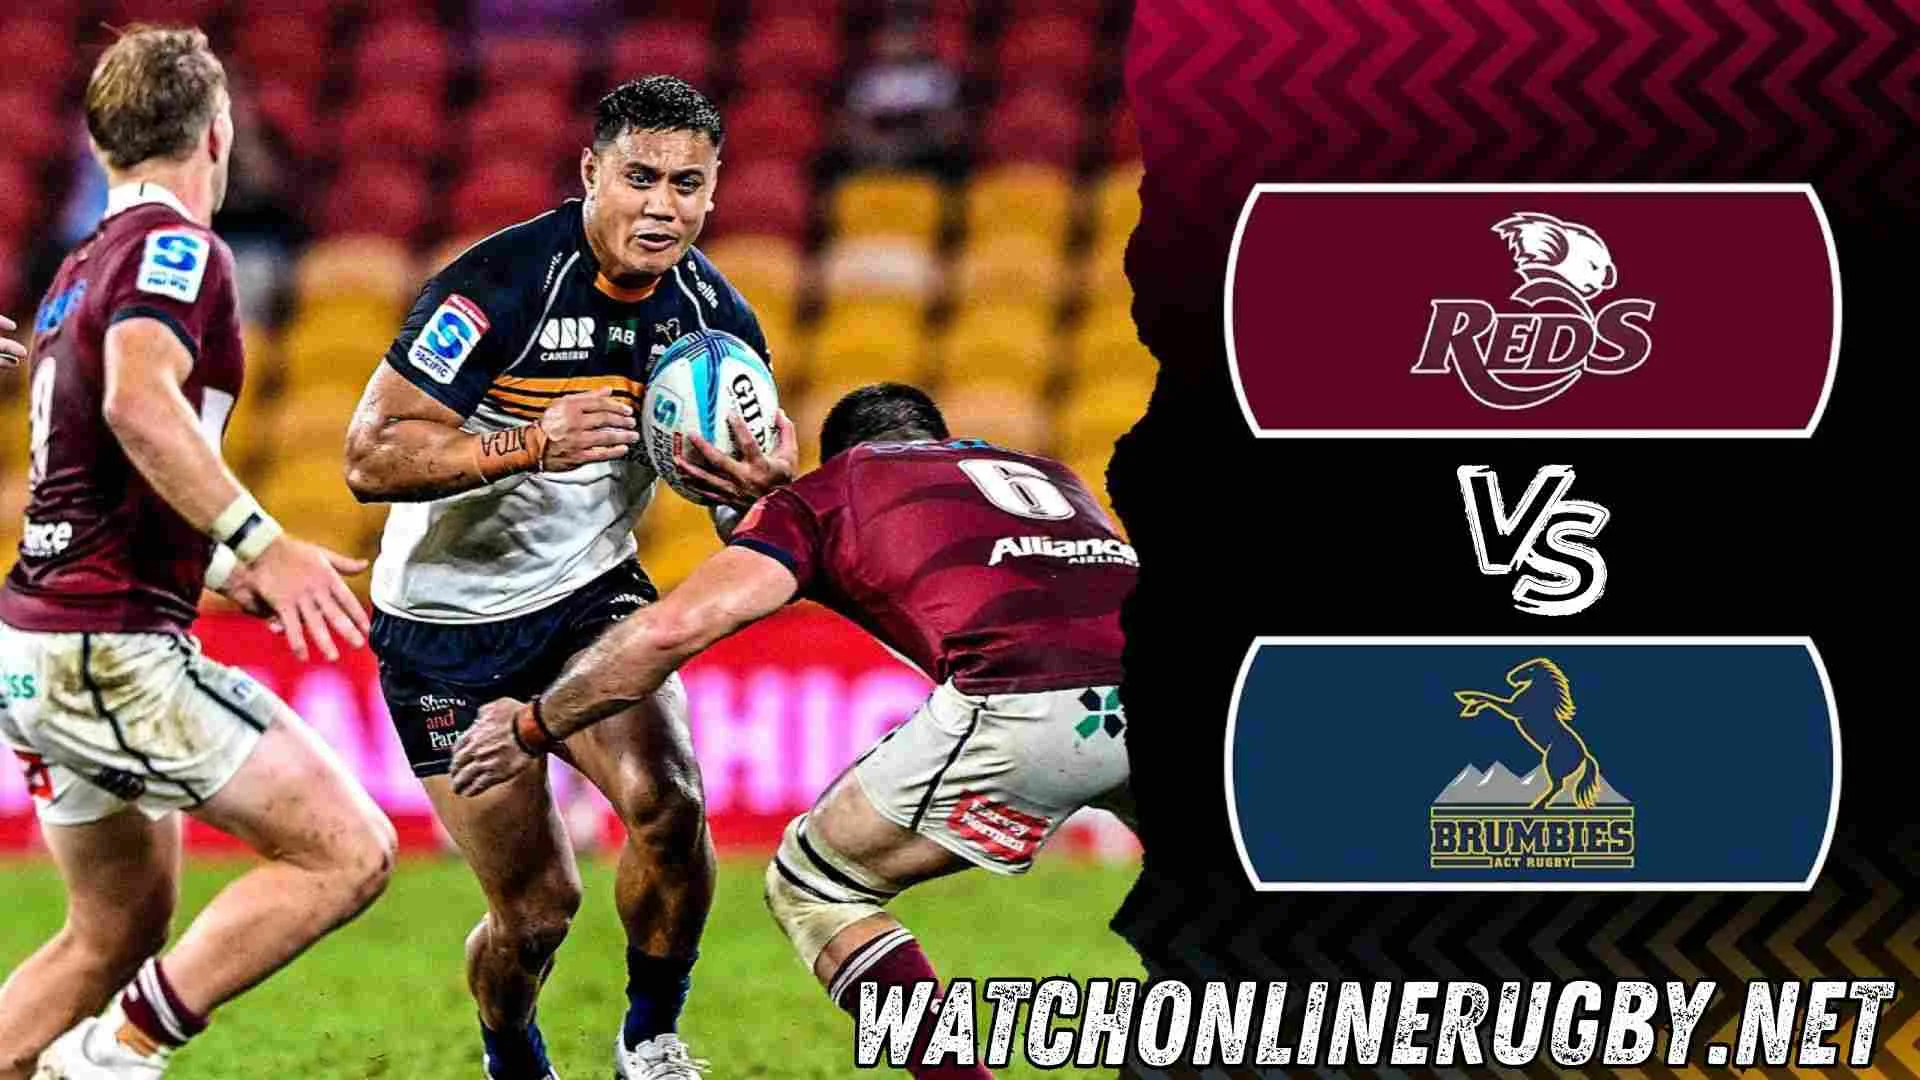 Watch Reds Vs Brumbies Rugby Live